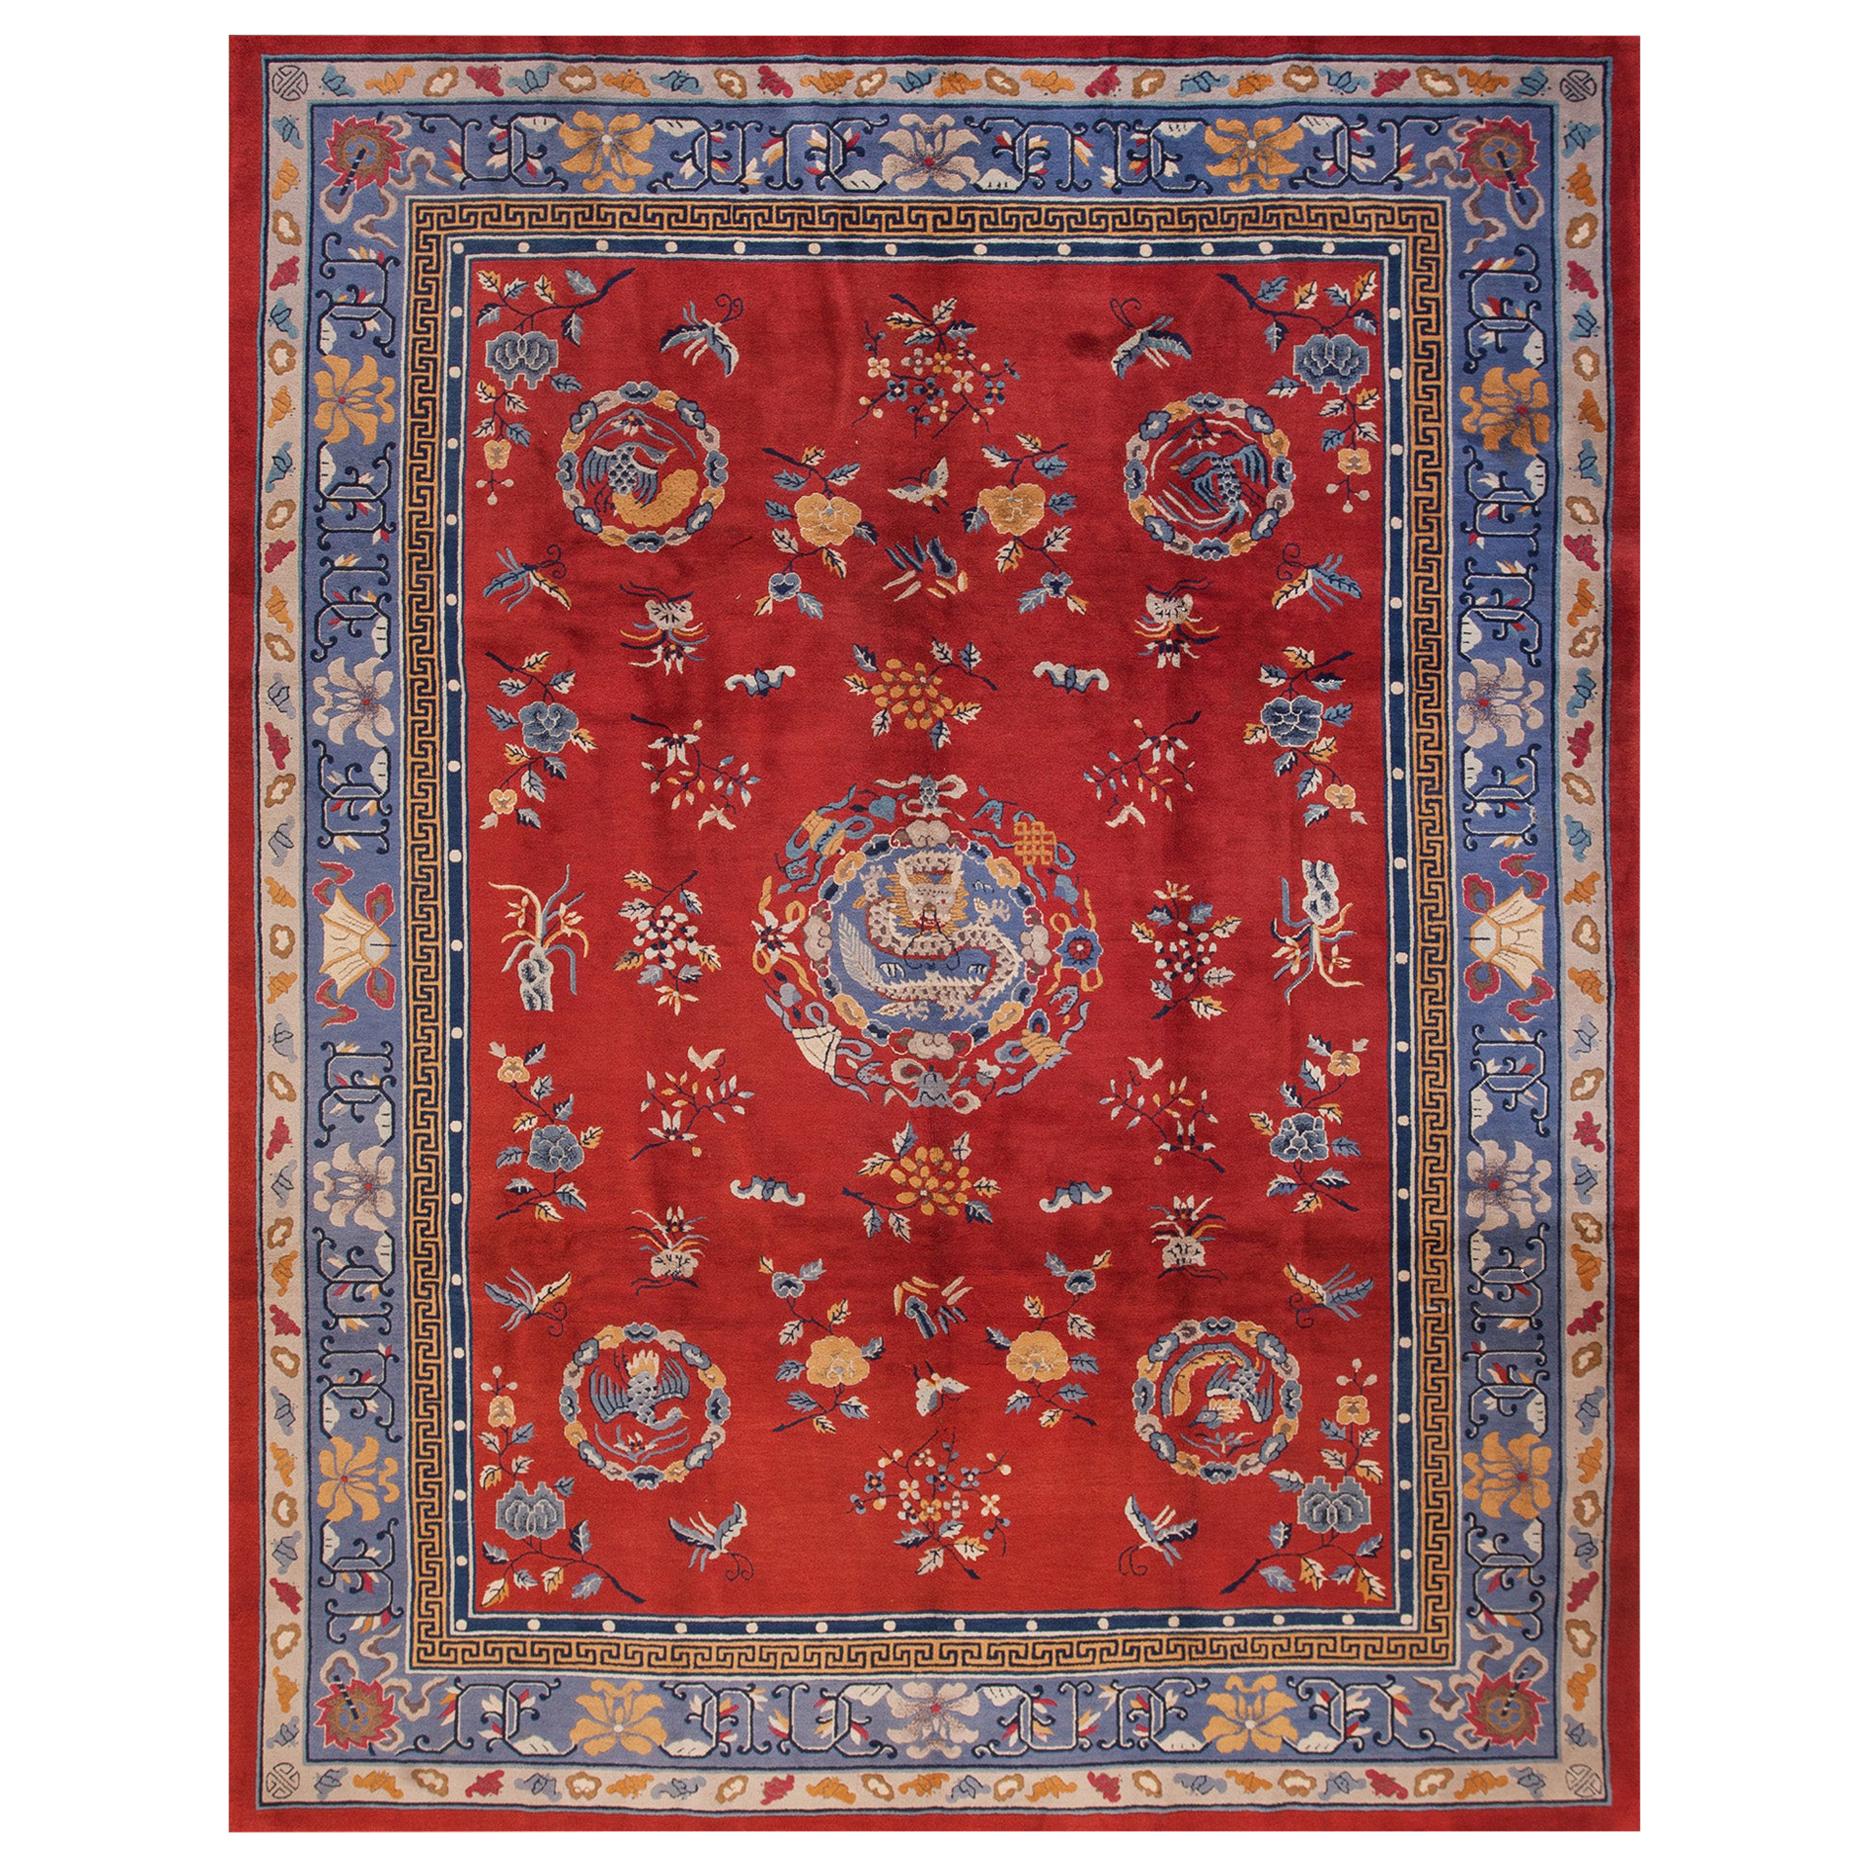 Early 20th Century Chinese Peking Carpet ( 9'2" x 11'8" - 280 x355 ) For Sale